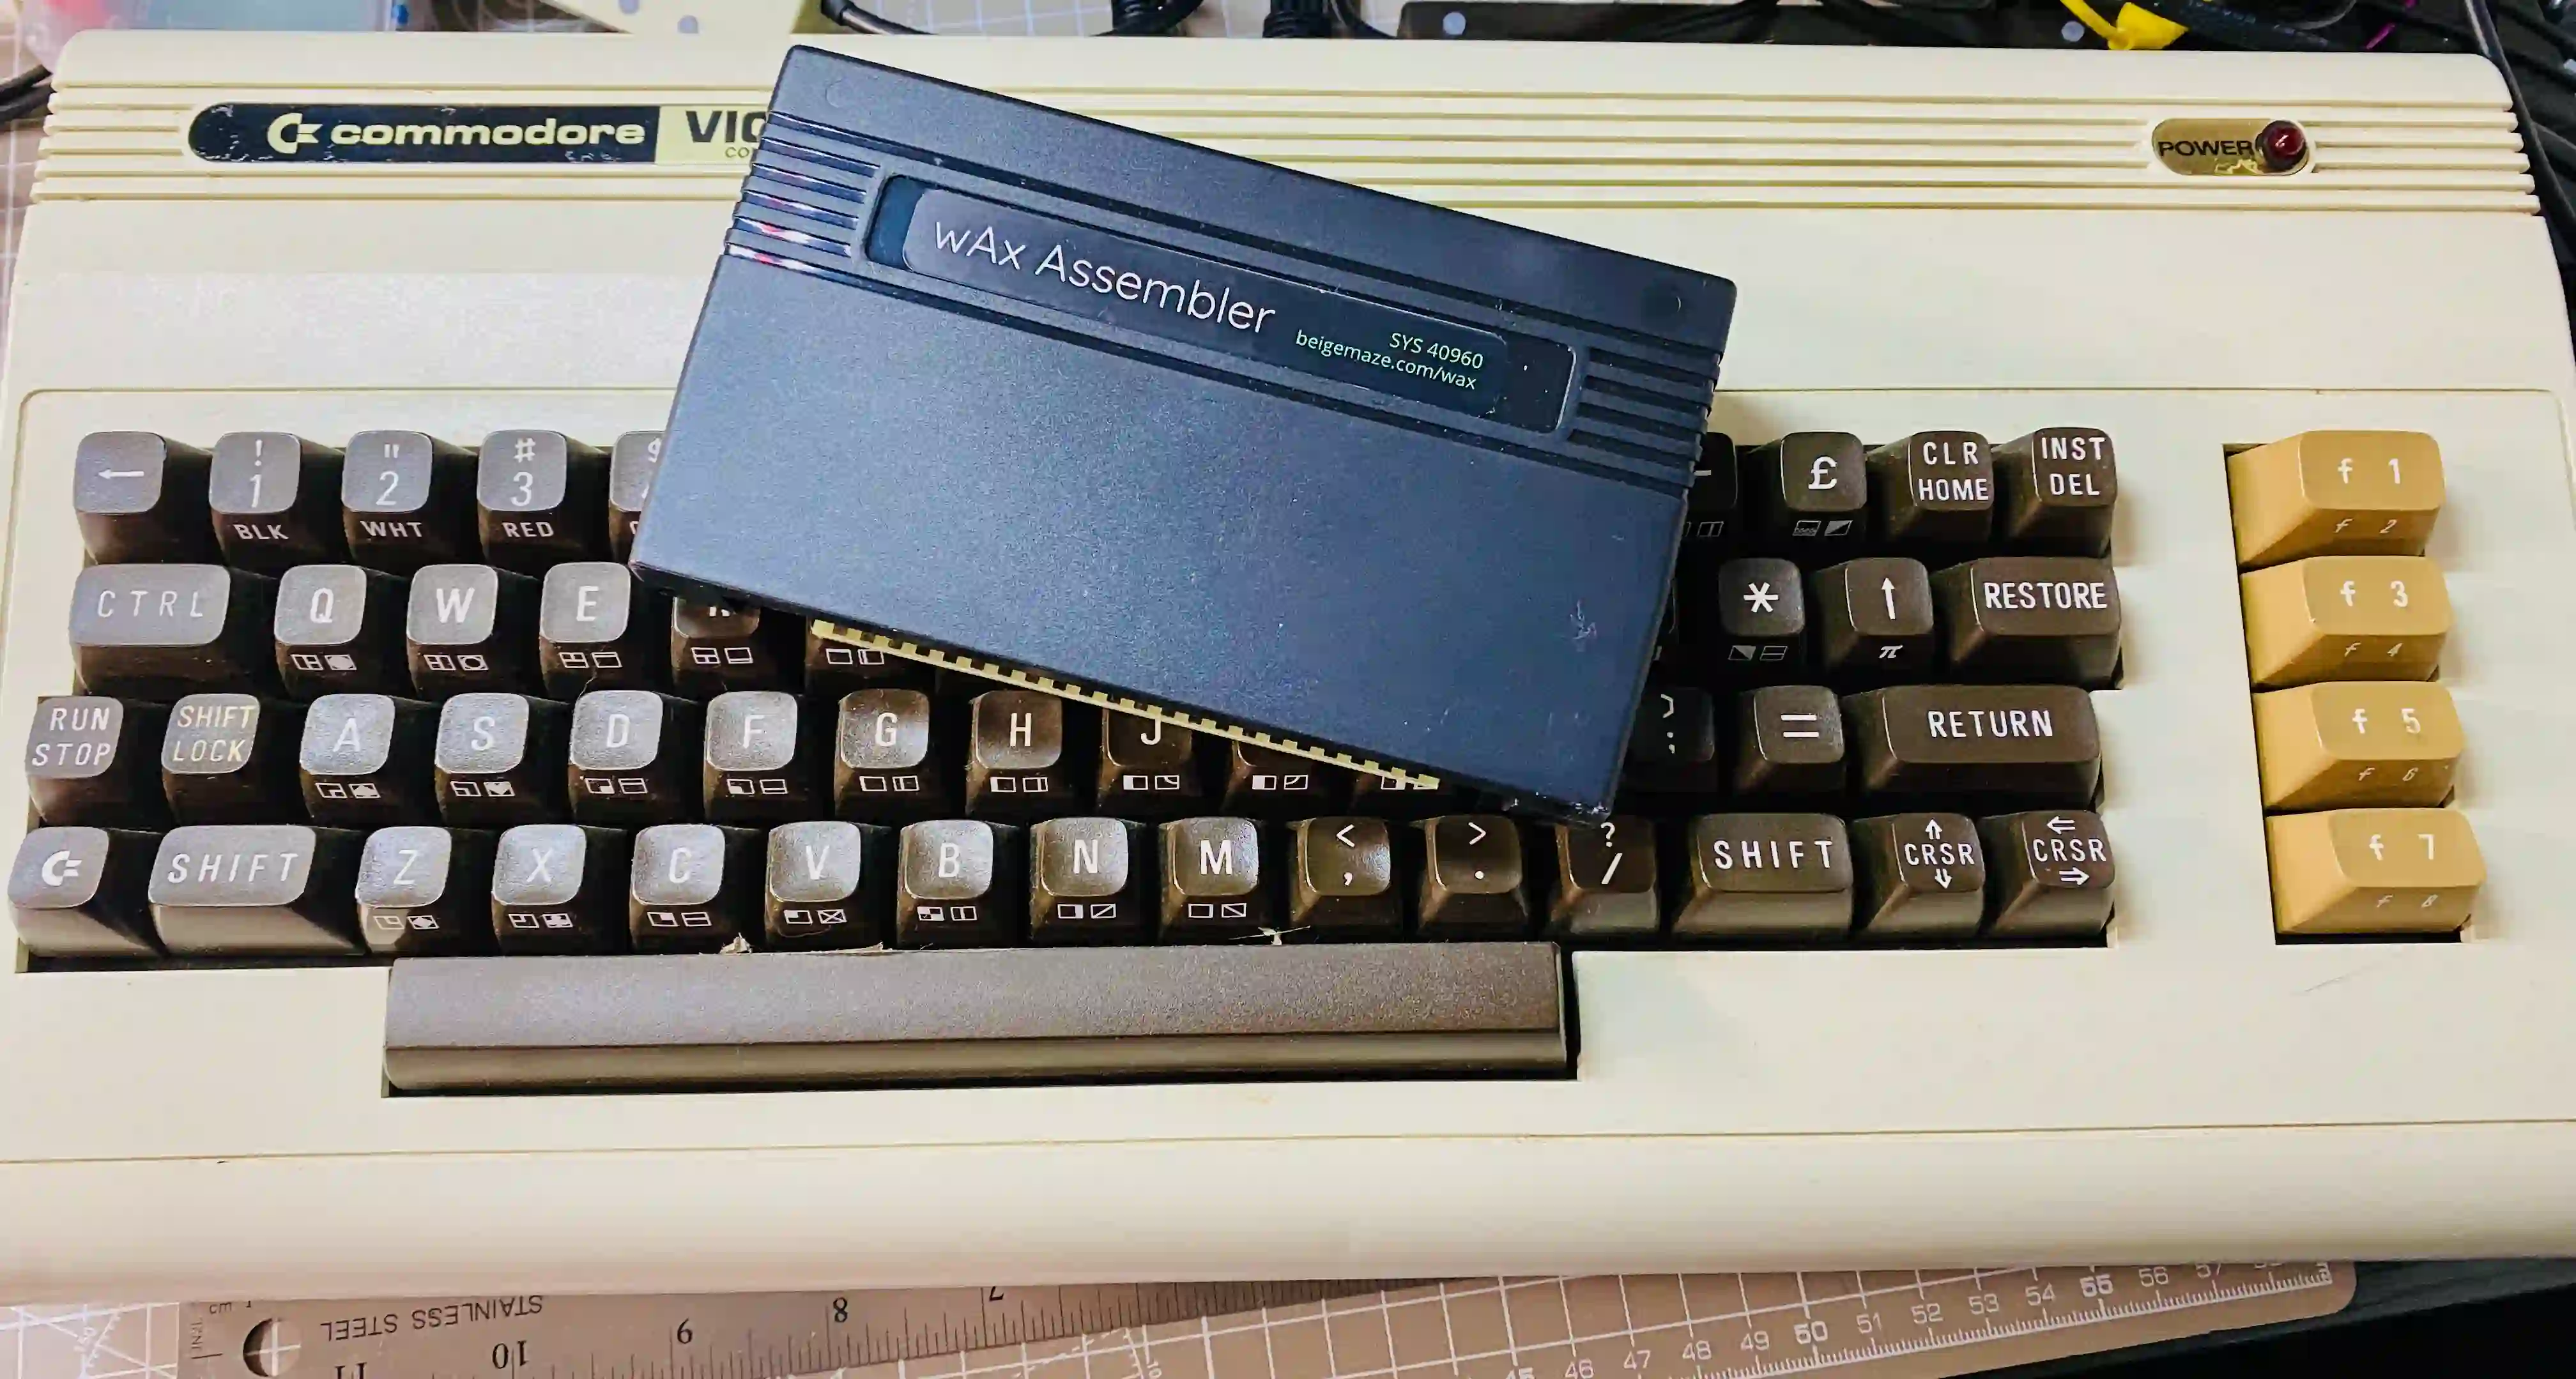 image from wAx the VIC-20